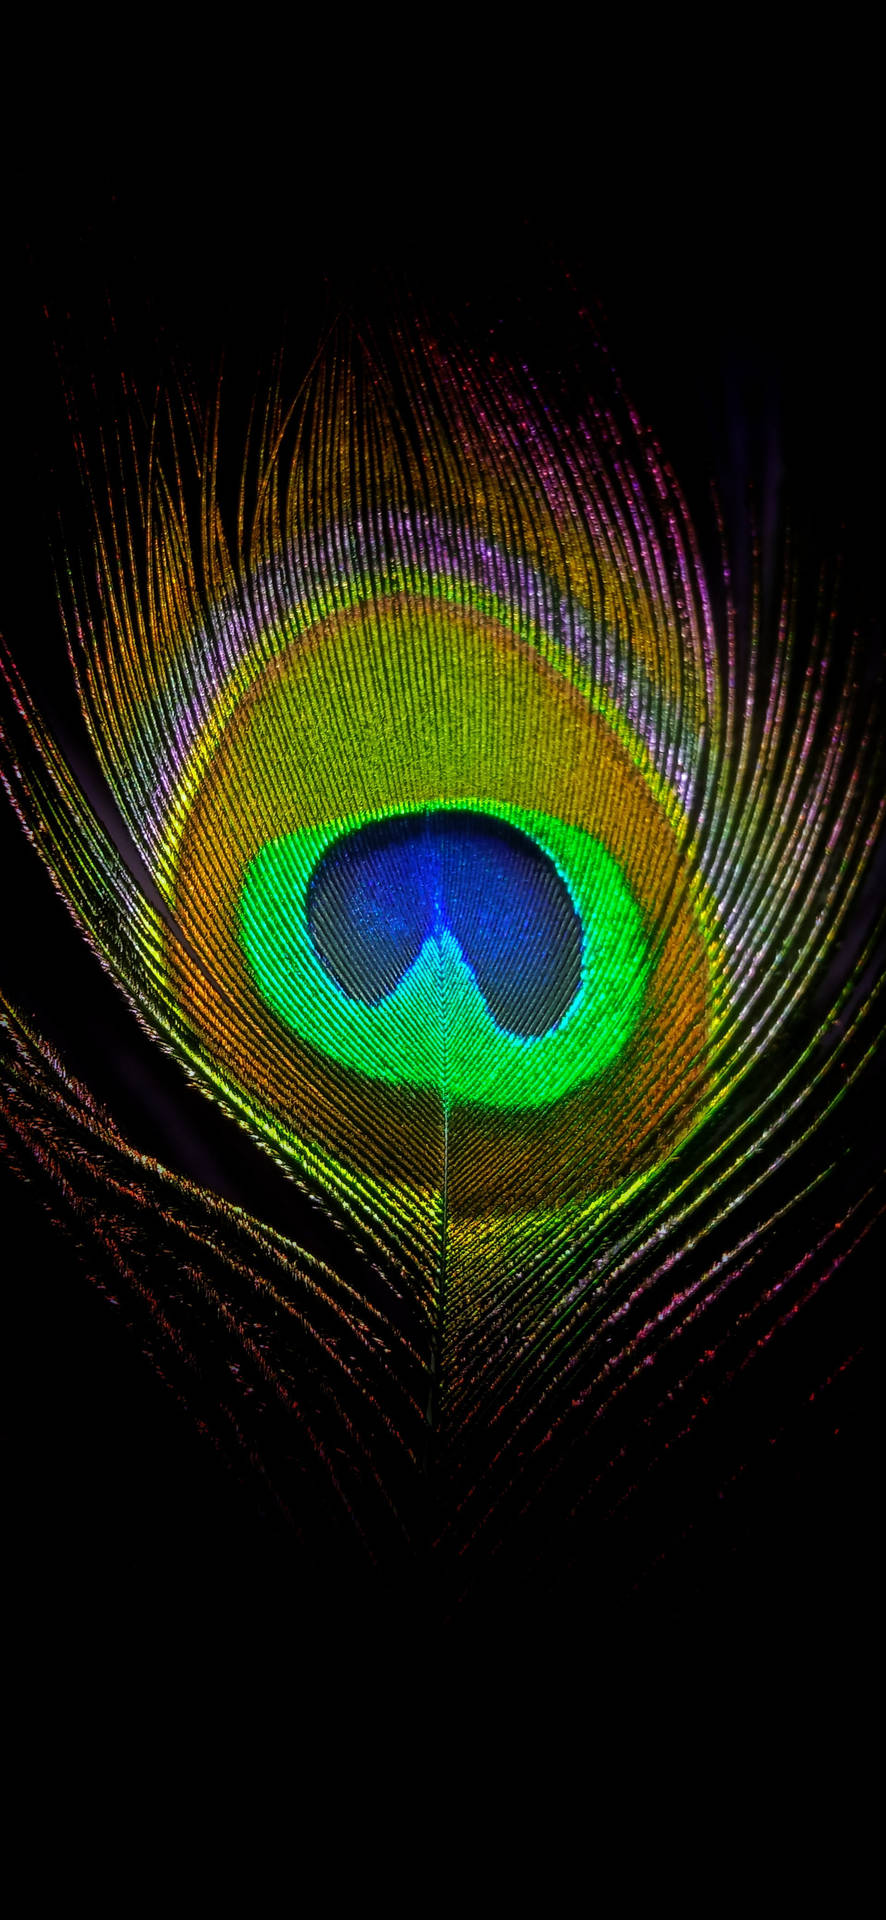 Captivating Peacock Feather on a Black Background Wallpaper